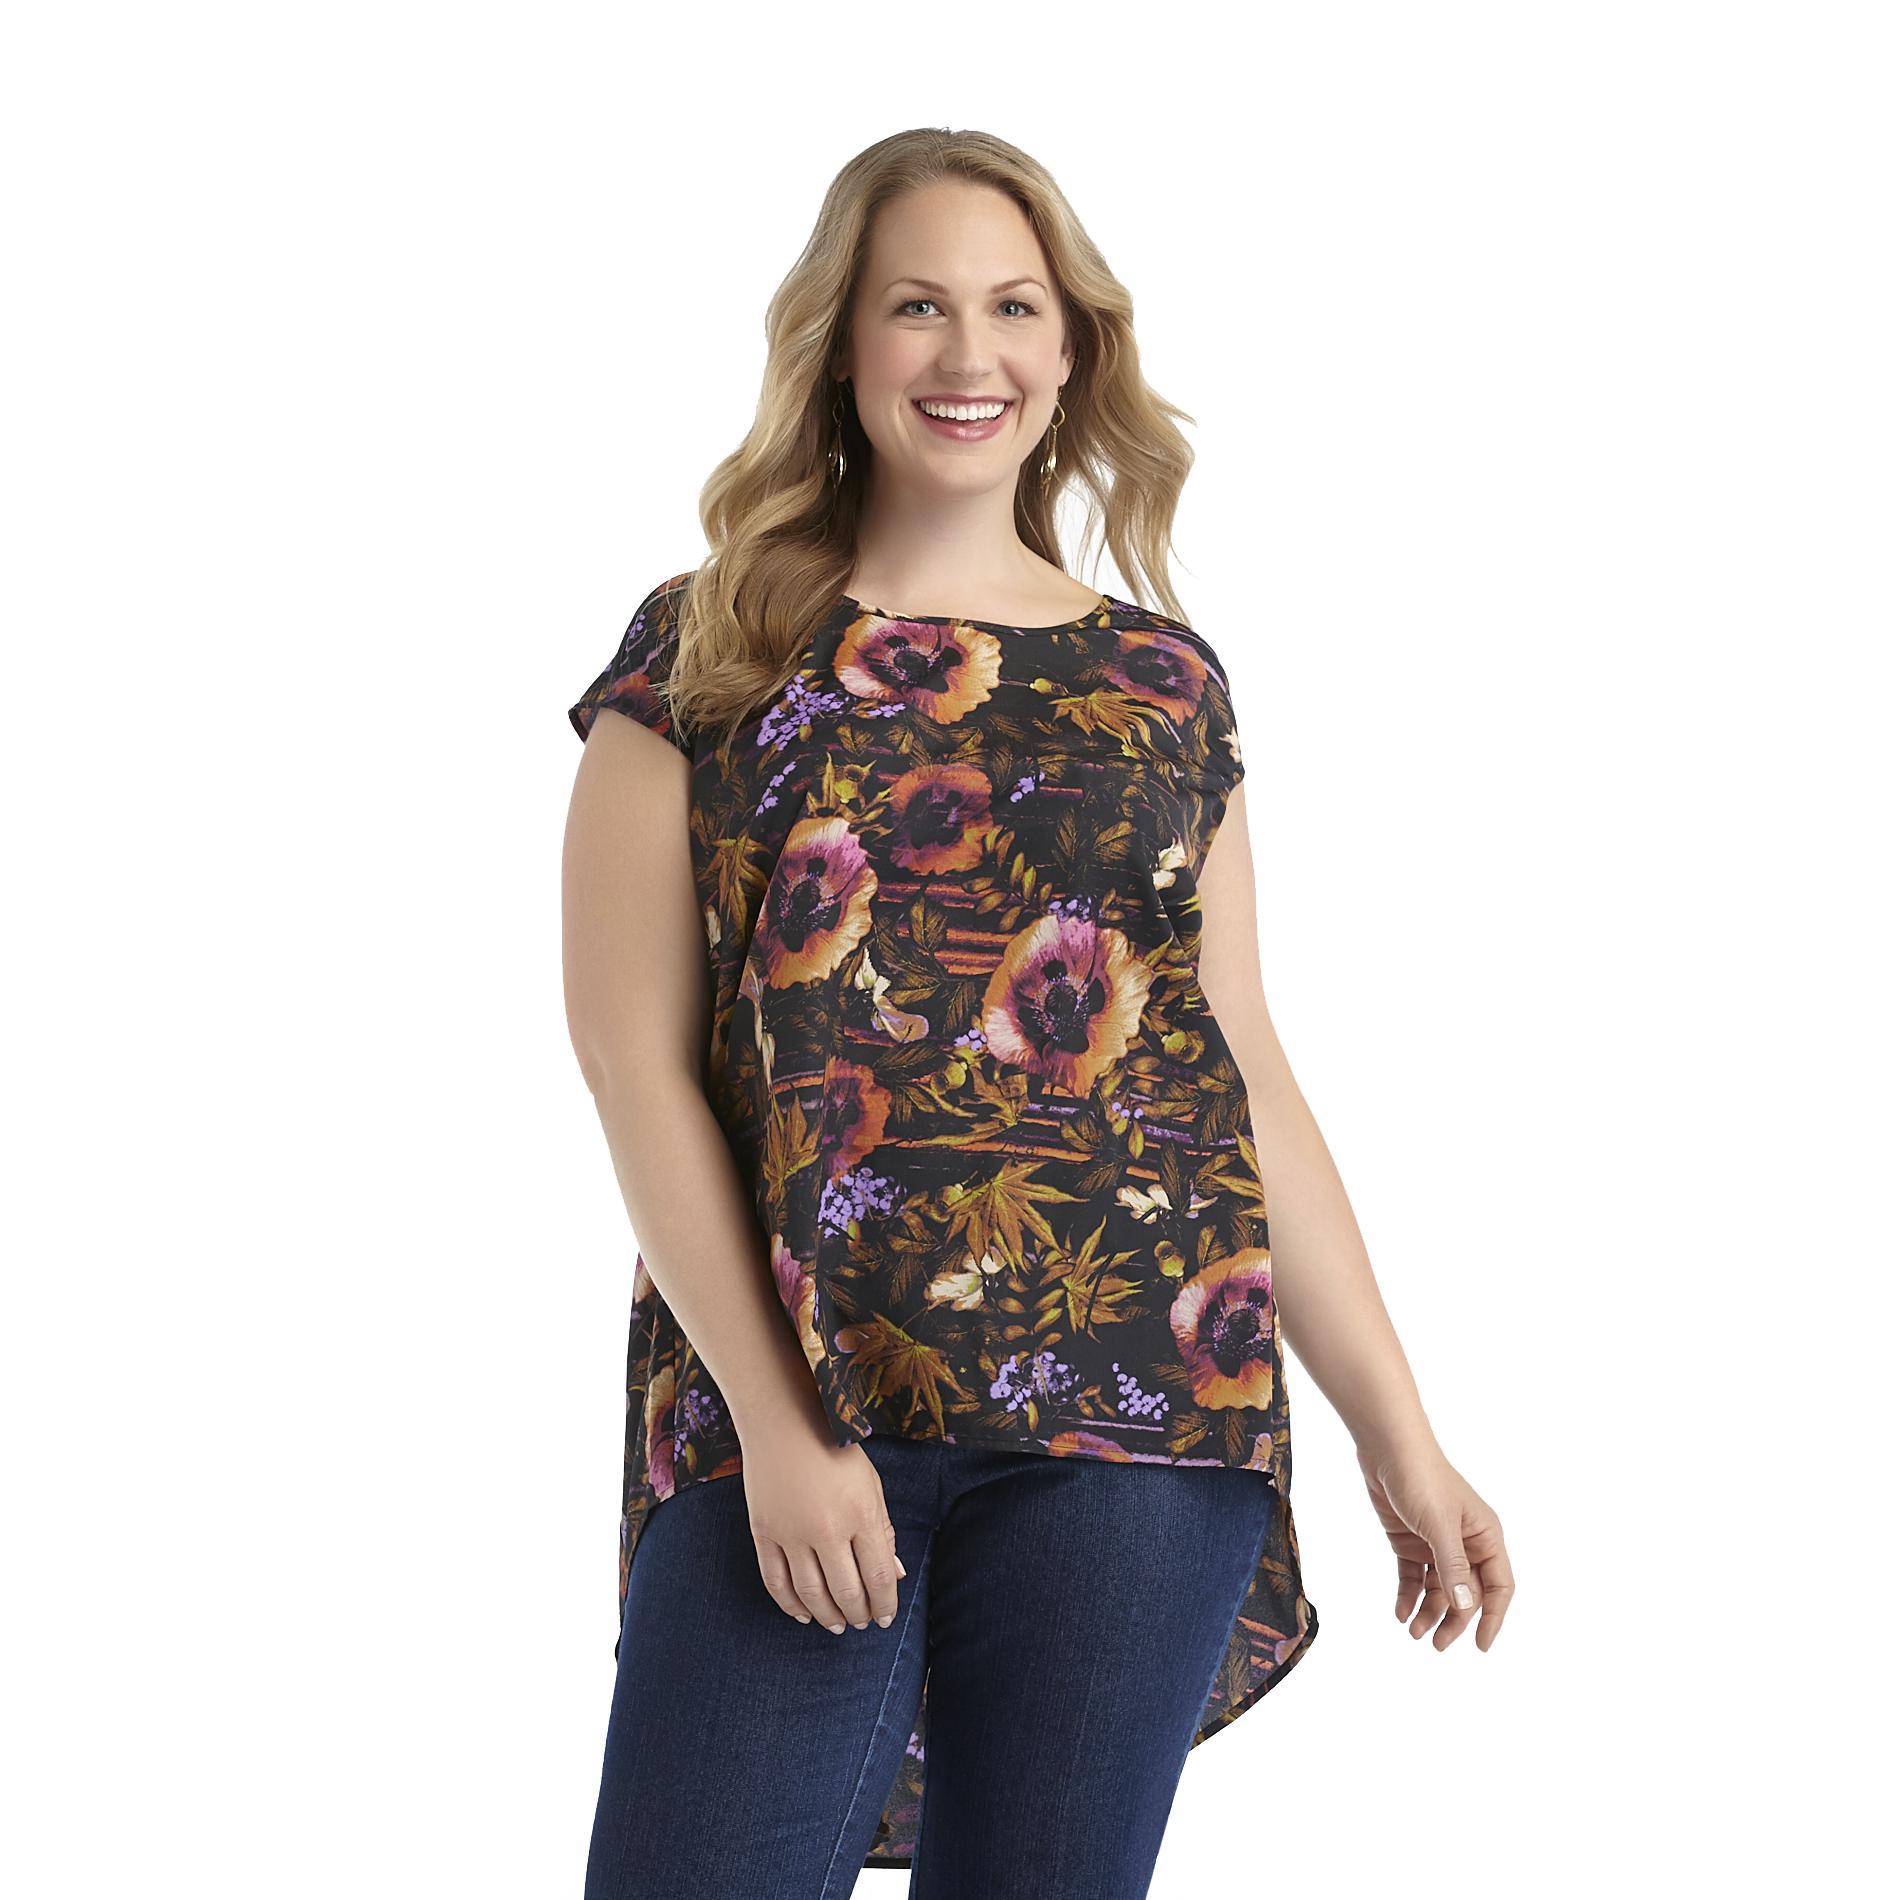 Love Your Style, Love Your Size Women's Plus V-Neck Blouse - Floral